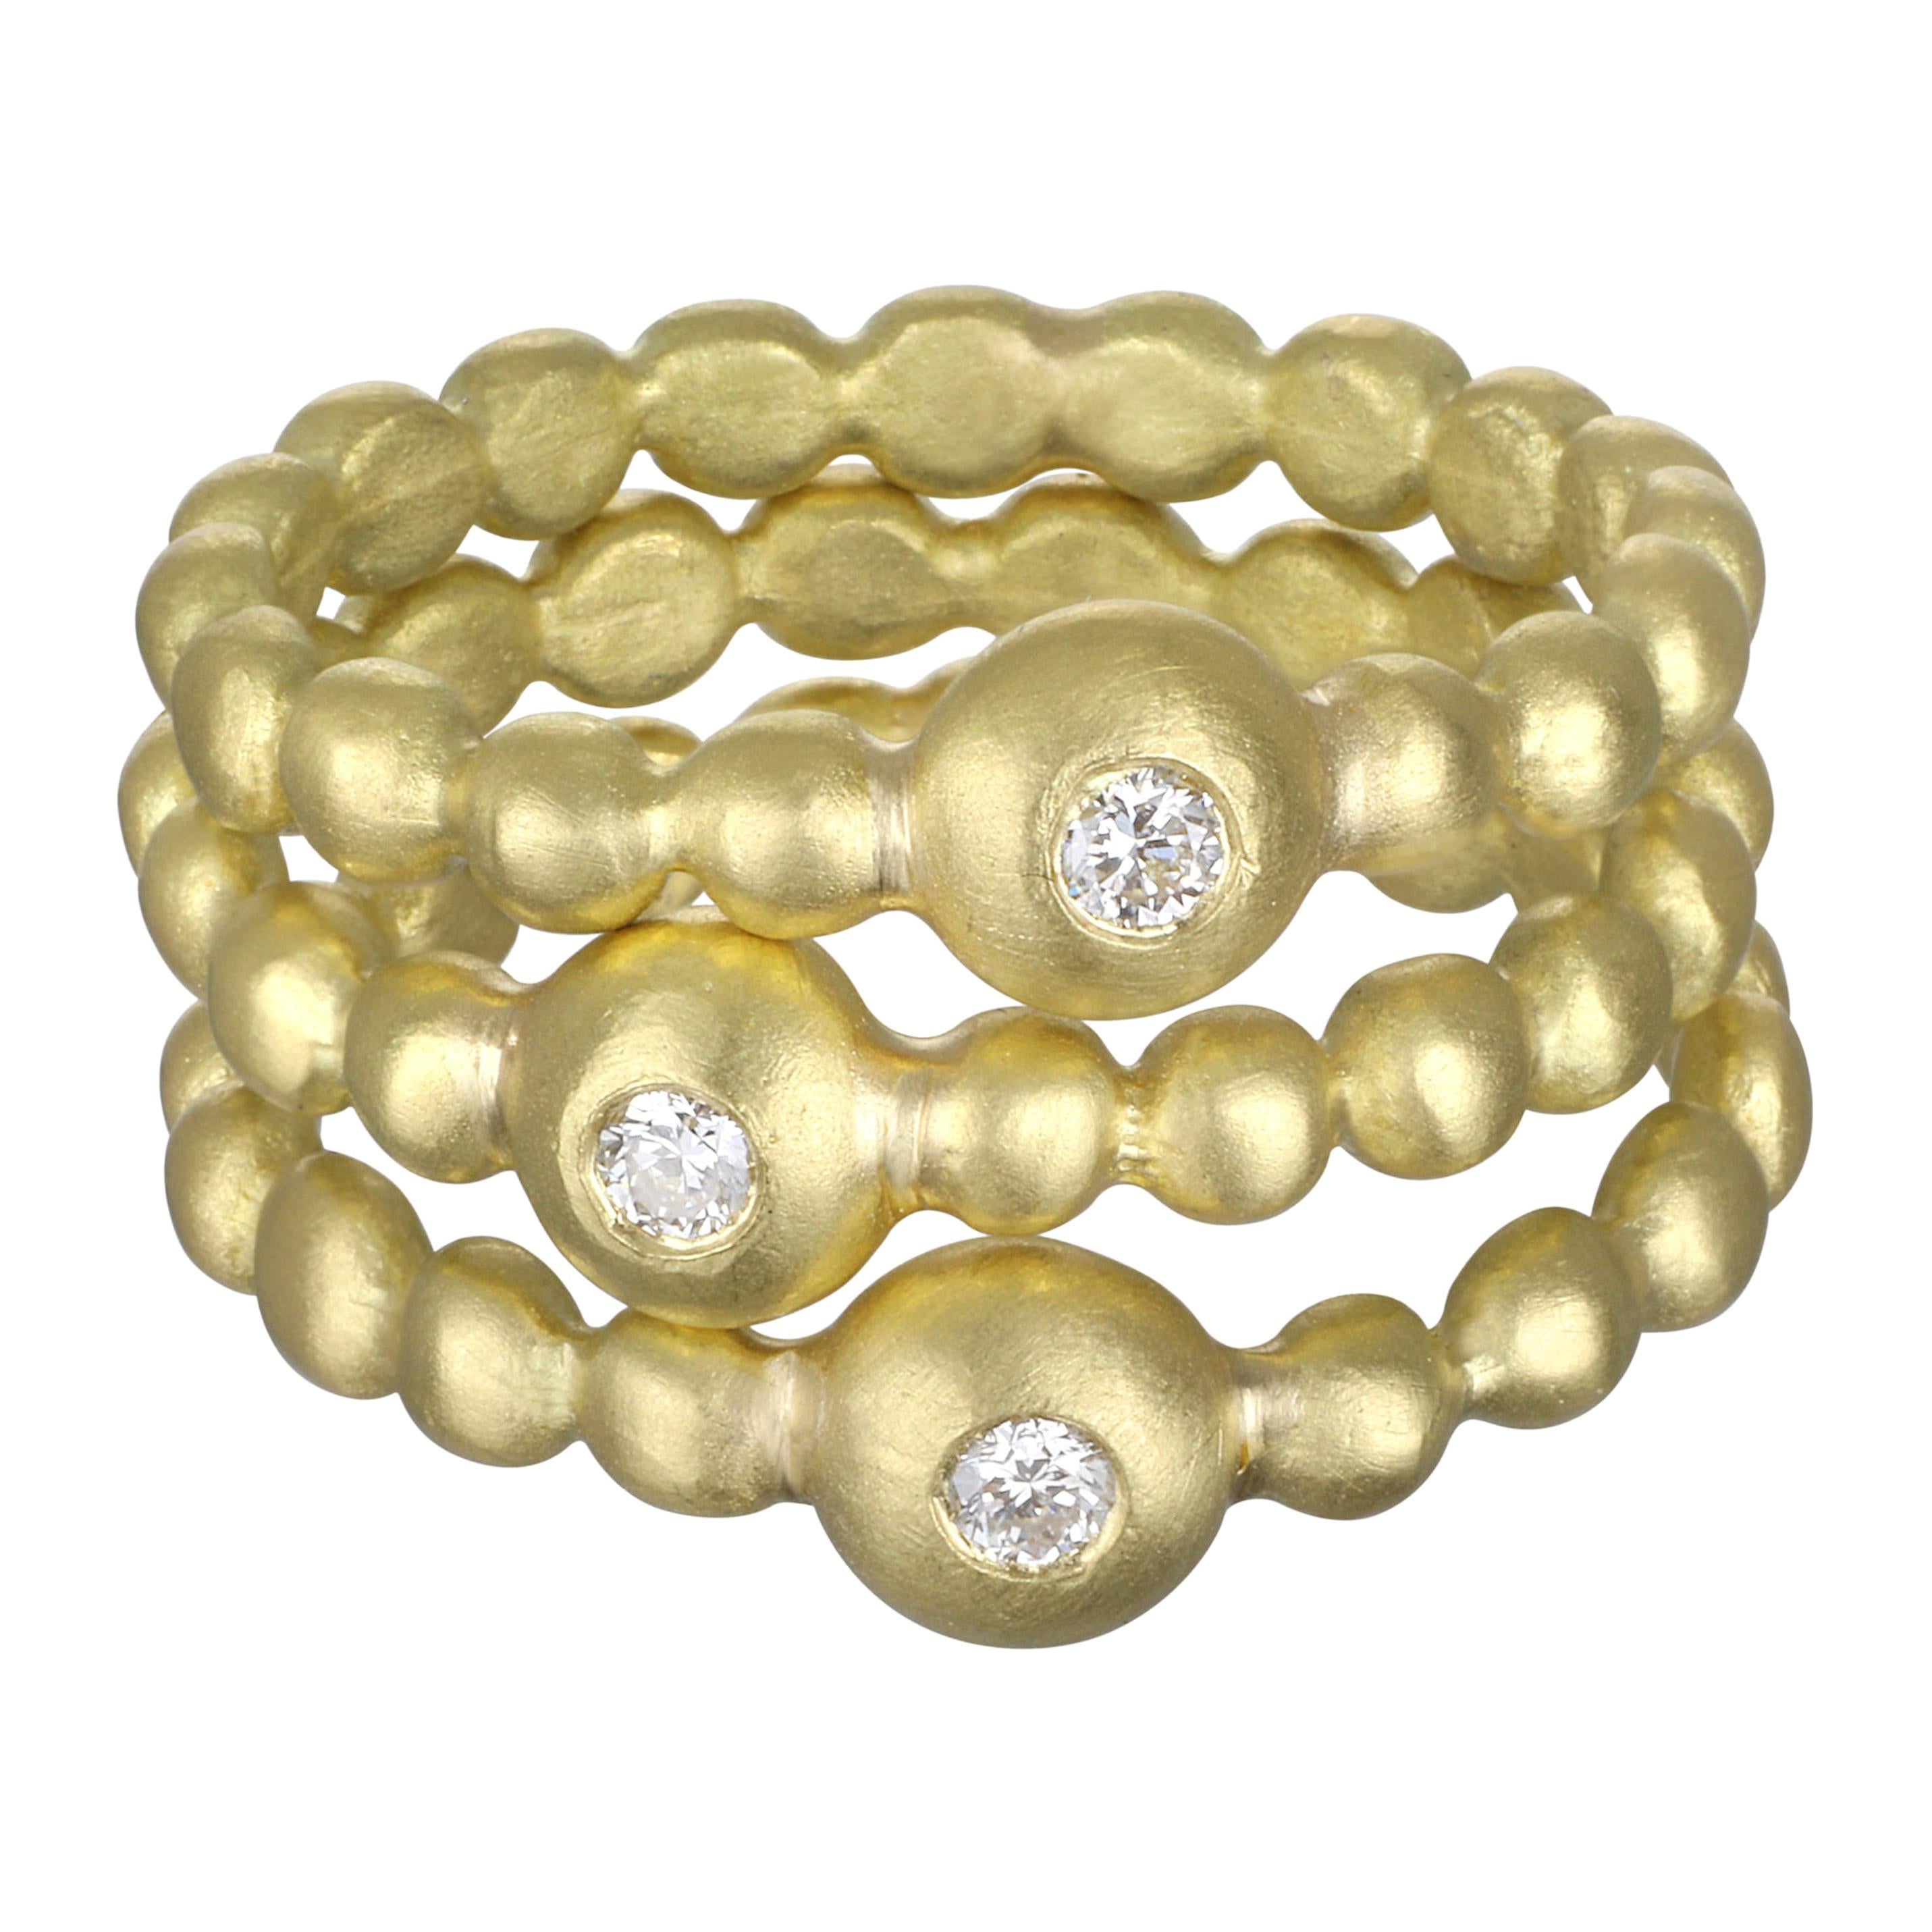 Faye Kim's signature 18karat gold diamond bead granulation ring is perfect for stacking.
Each one sparkles with a single round brilliant cut diamond.  
Matte finish. Each sold separately.

Size 6.5  Can be resized
Diamond = .04 ct

Photos show